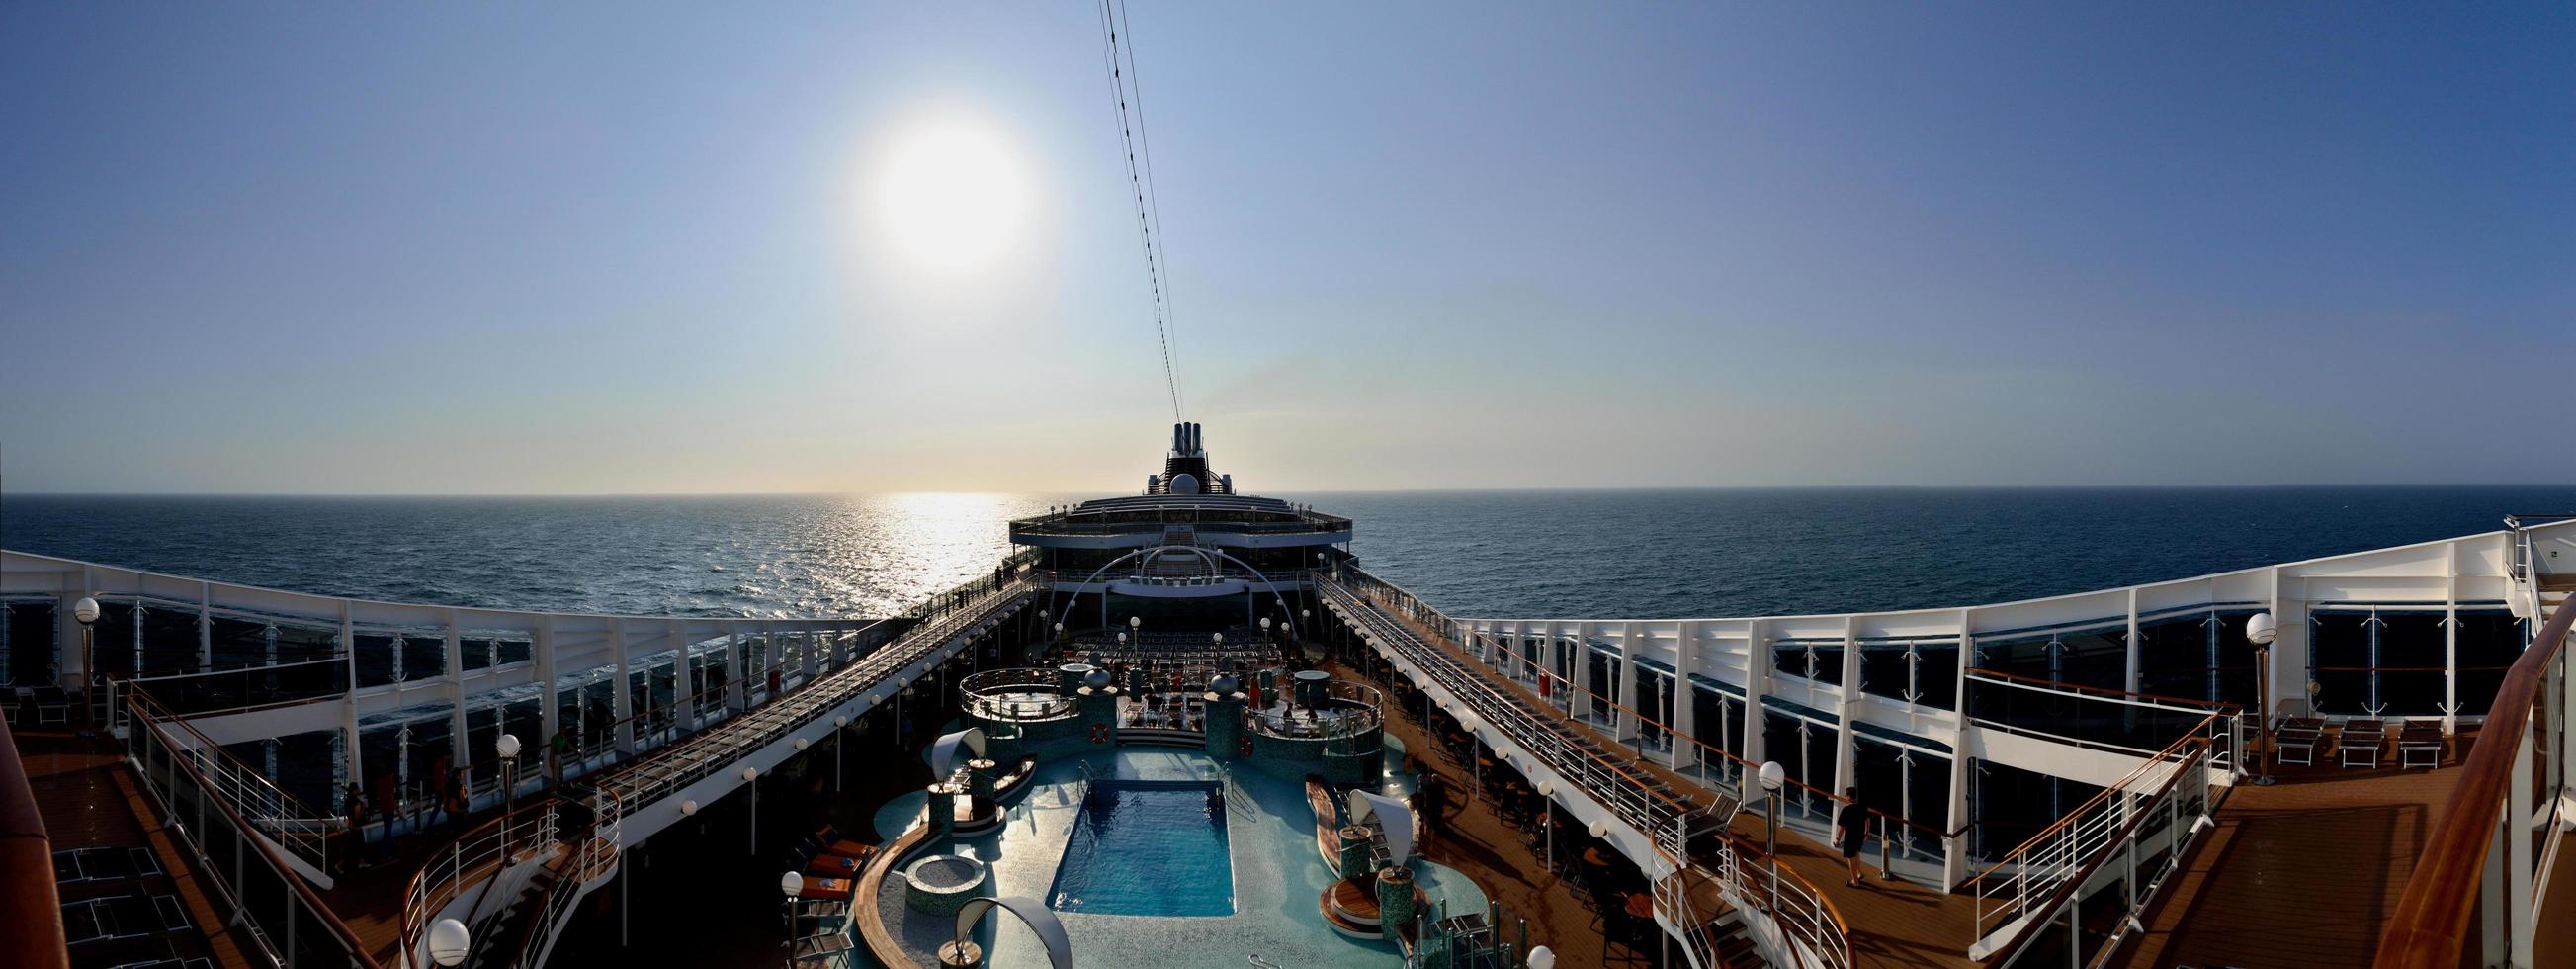 cruise ship with open deck panorama photo